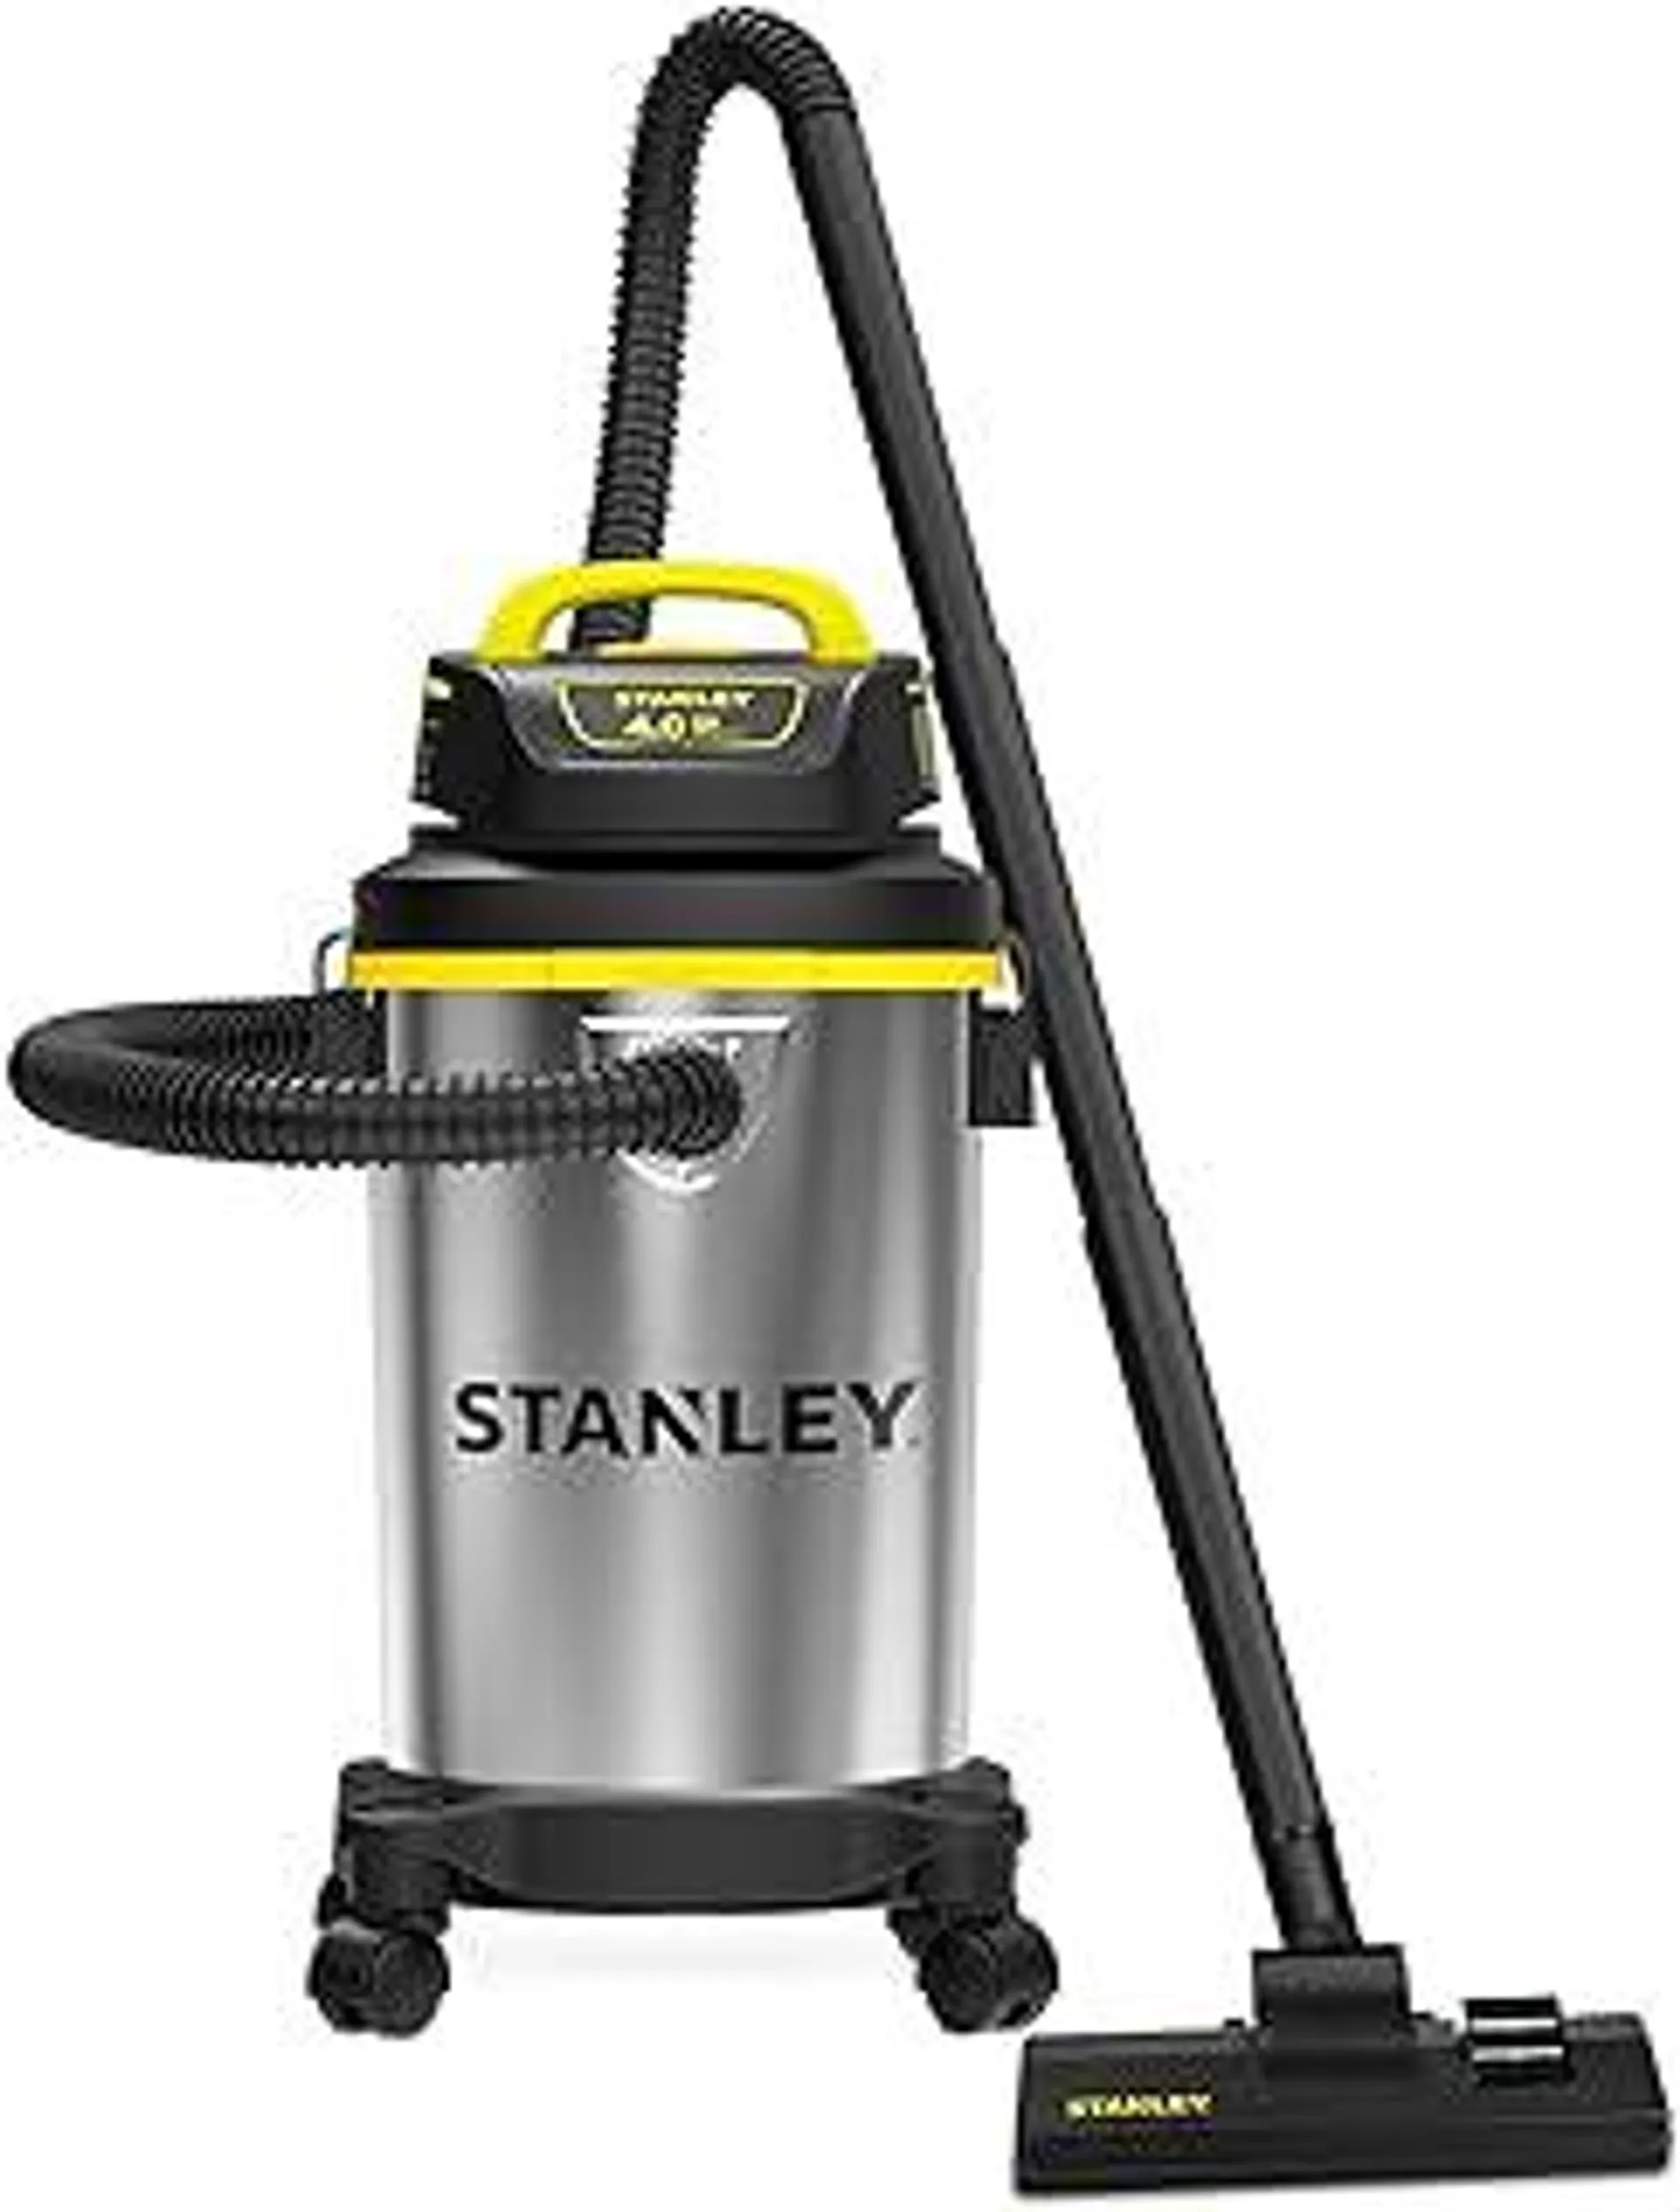 Stanley SL18129 Wet/Dry Vacuum, 4 Gallon, 4 Peak HP, Stainless Steel Tank with Top Handle, 3-in-1 Shop Vacuum Cleaner with Blower for Home, Garage, Car, Workshop, Pet Hair, Silver+Yellow+Black